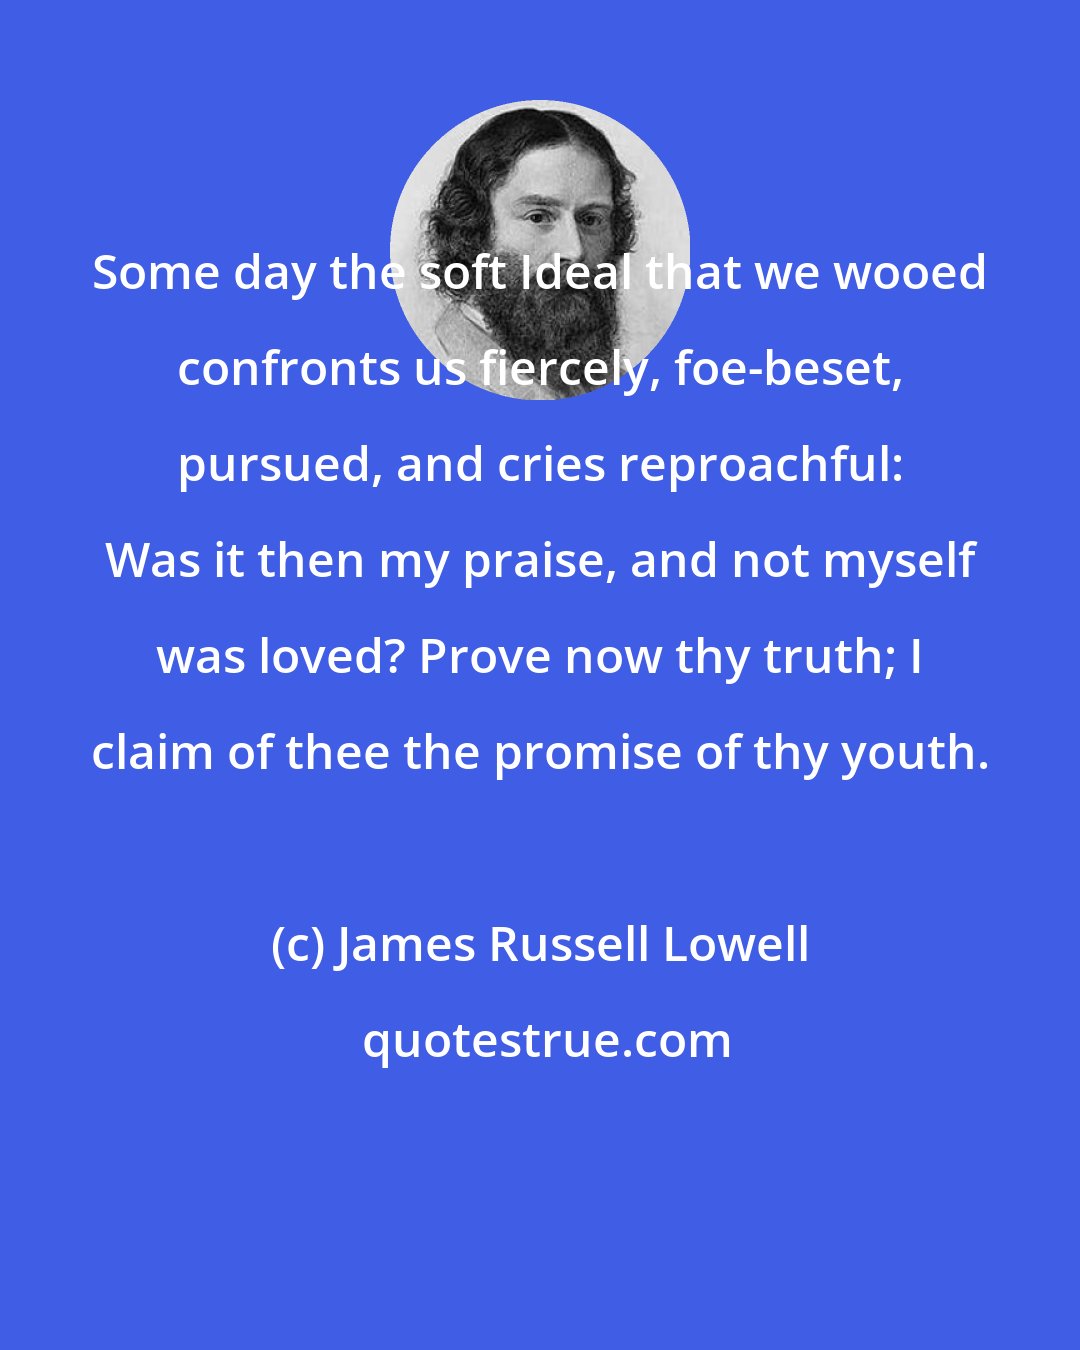 James Russell Lowell: Some day the soft Ideal that we wooed confronts us fiercely, foe-beset, pursued, and cries reproachful: Was it then my praise, and not myself was loved? Prove now thy truth; I claim of thee the promise of thy youth.